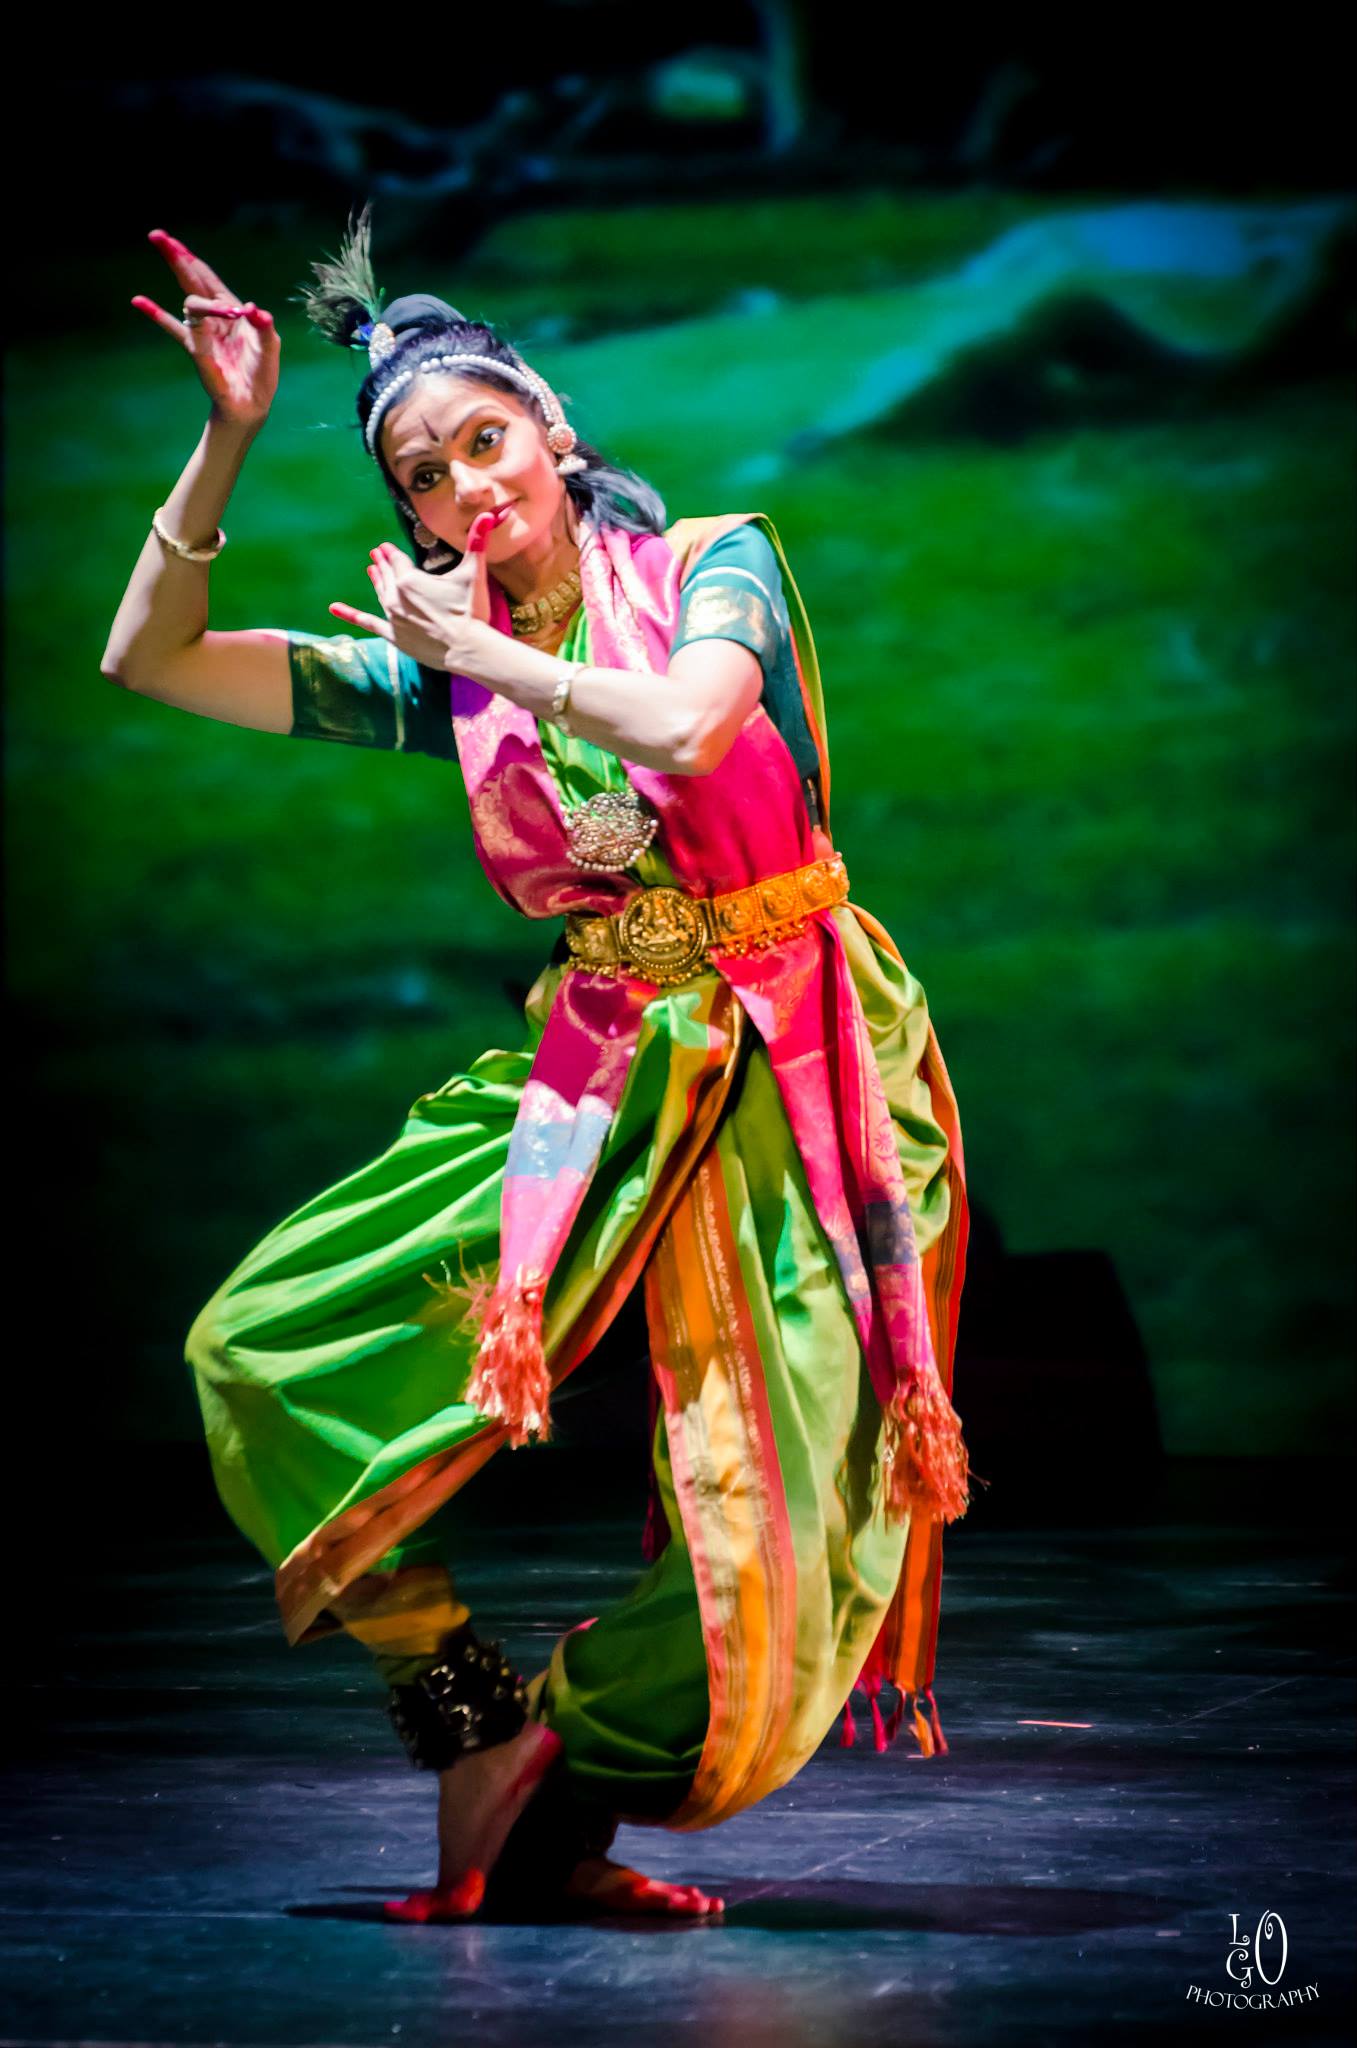 Indian dancer in colorful traditional clothing performs on stage with a green background